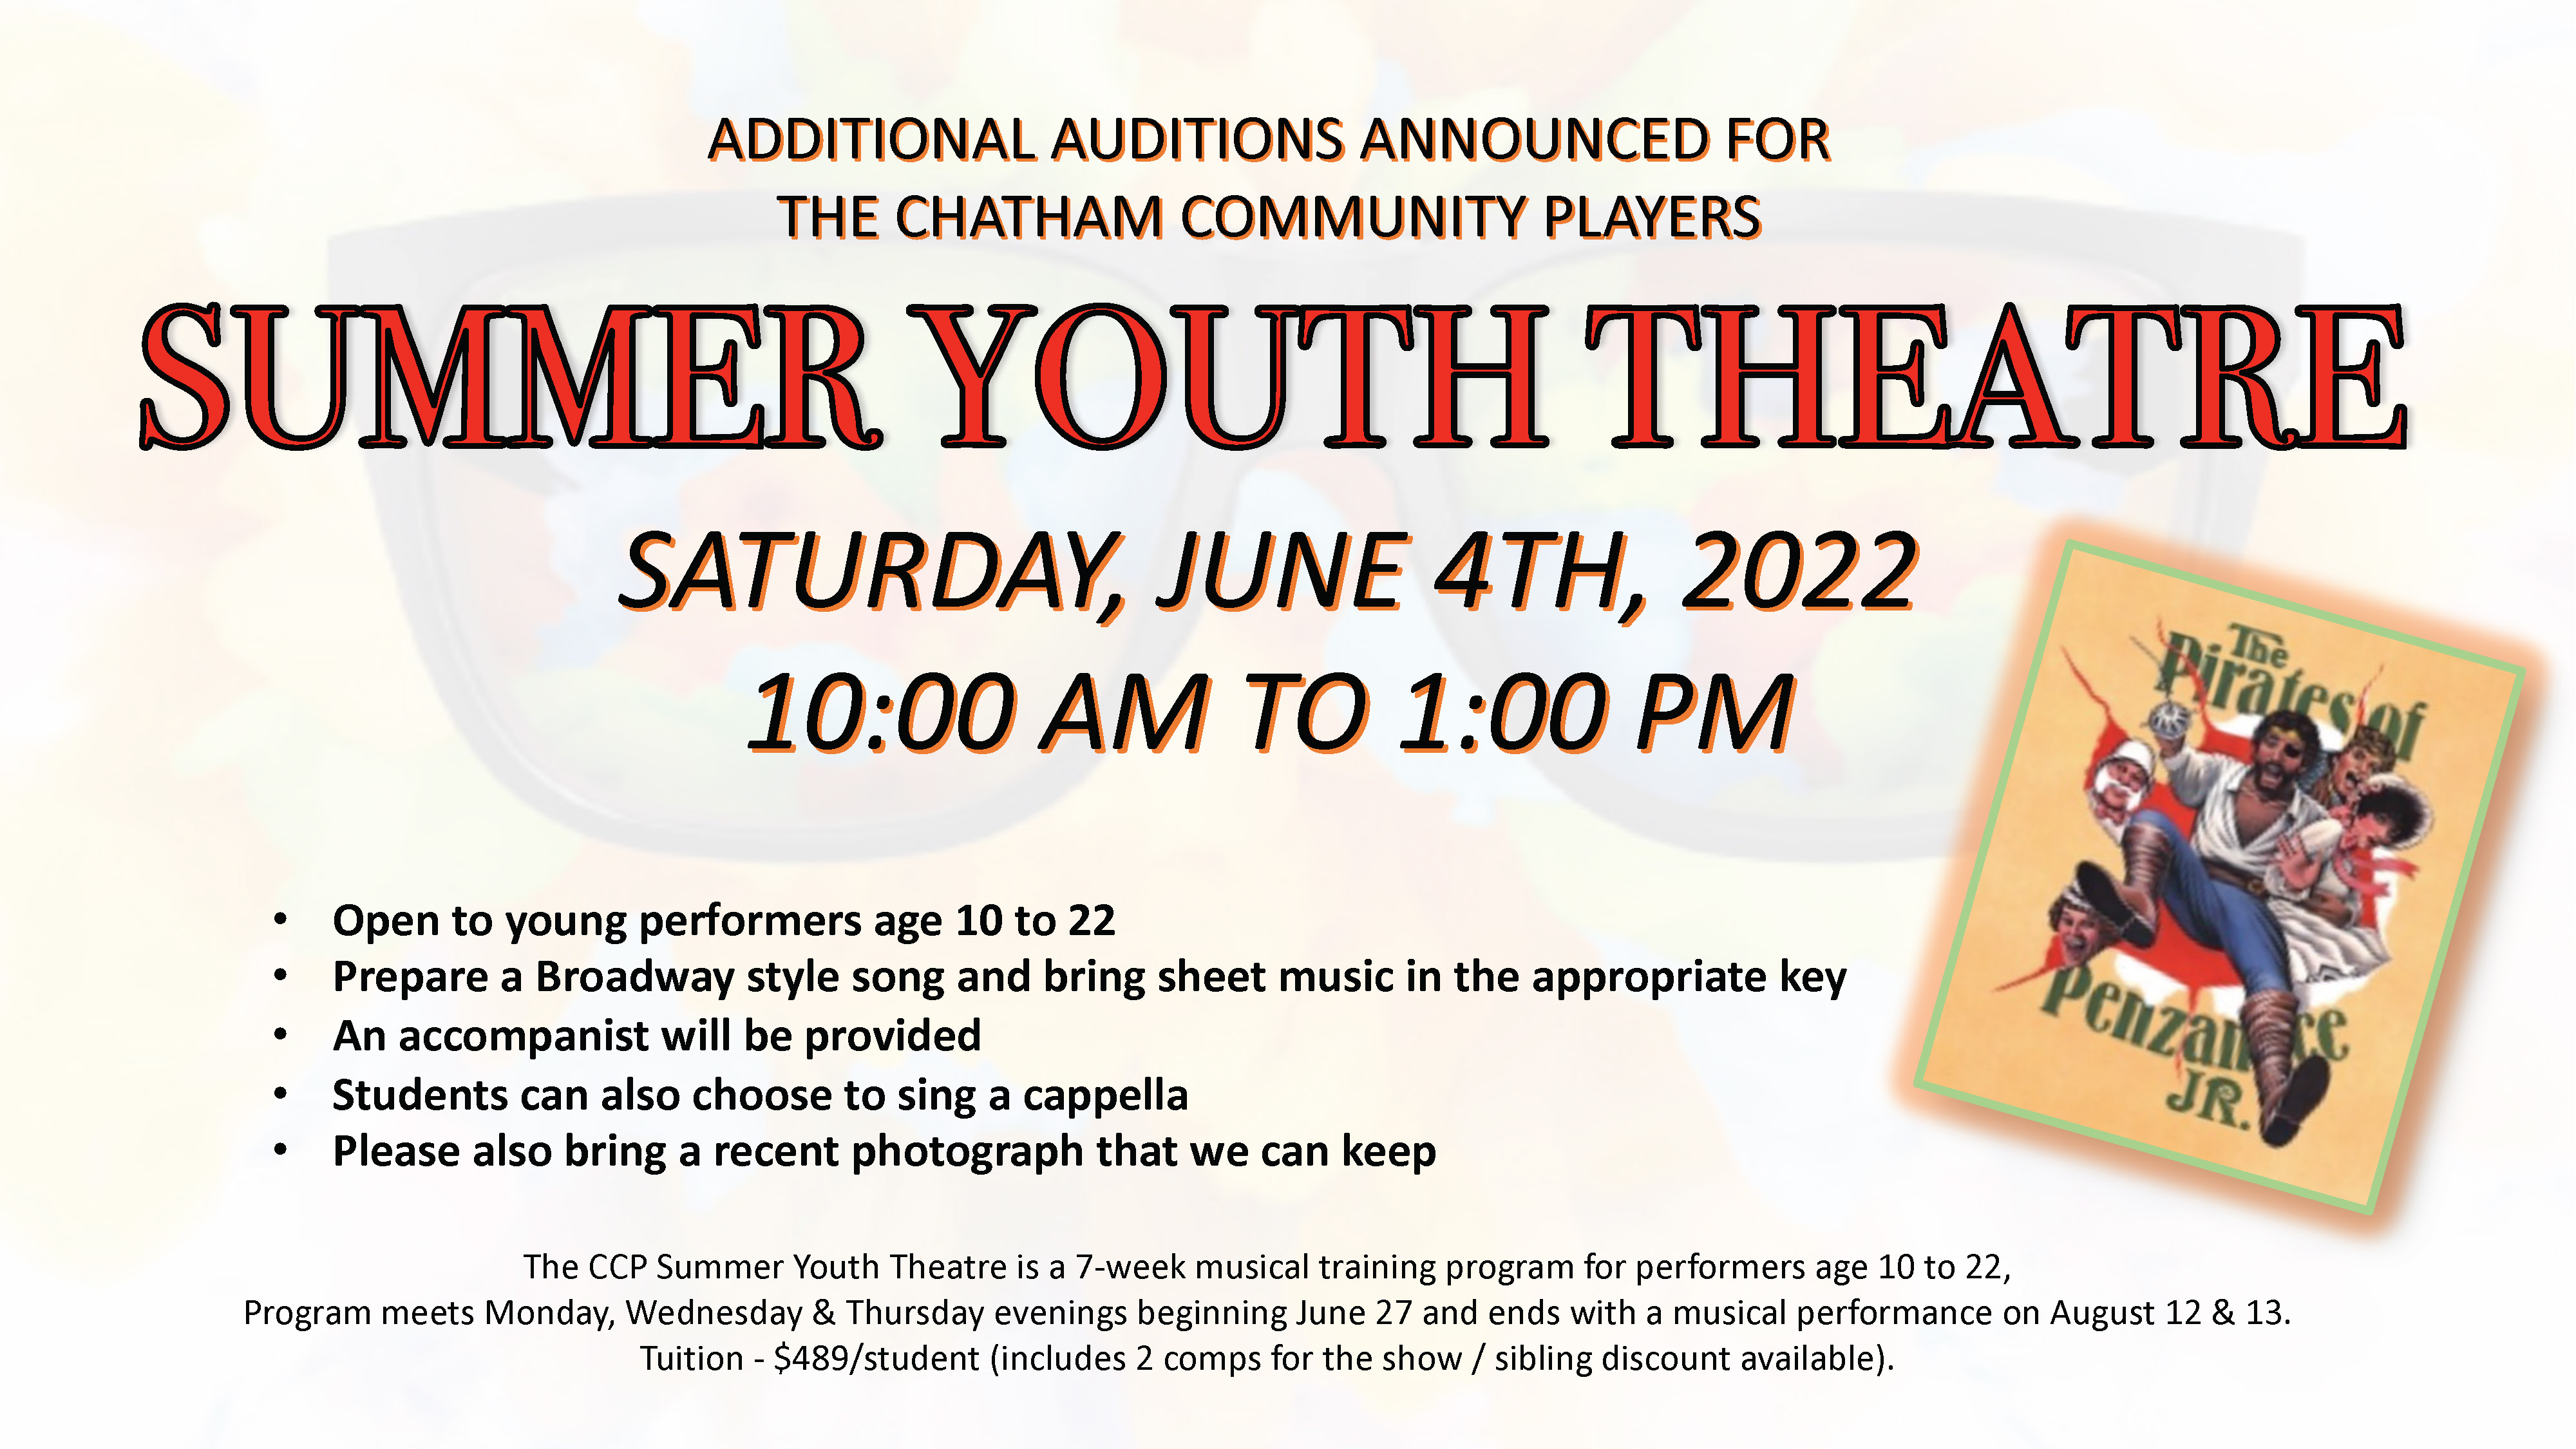 Additional Auditions for SUMMER YOUTH THEATRE